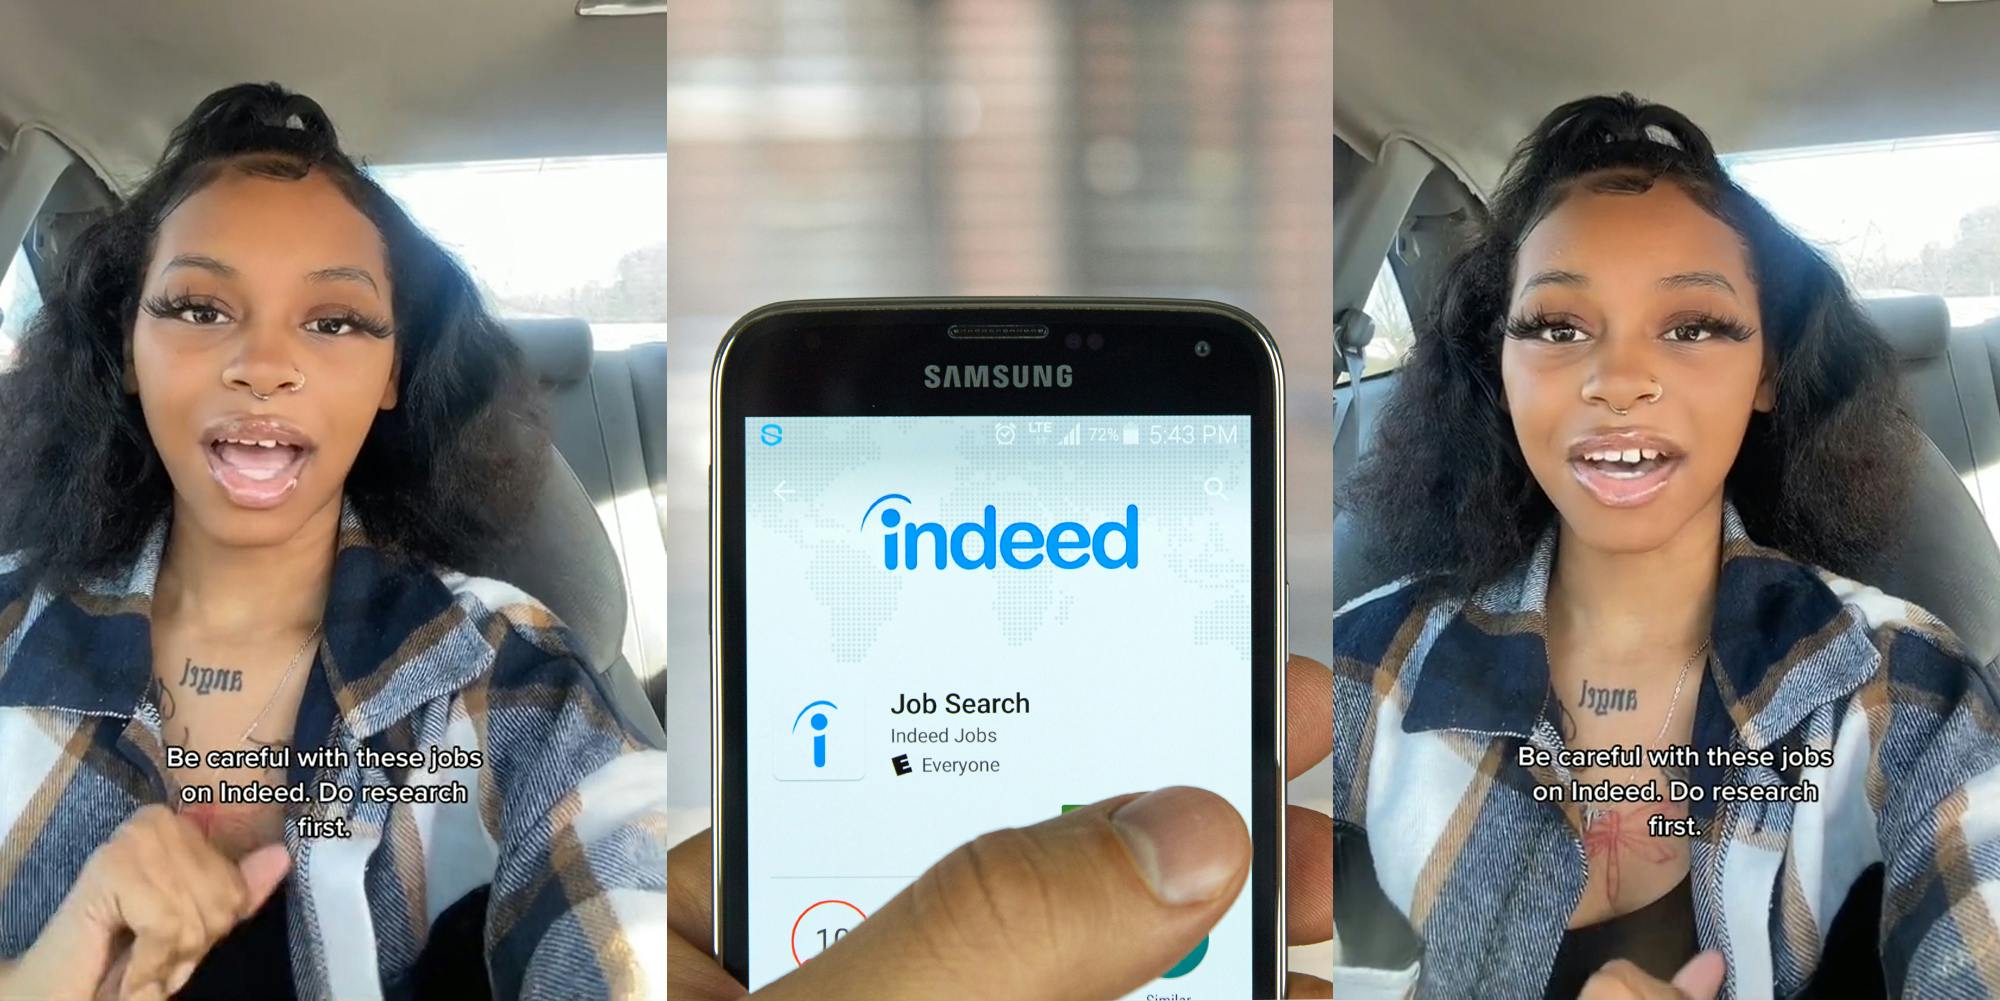 woman speaking in car with caption "Be careful with these jobs on Indeed. Do research first." (l) woman holding phone with Indeed on screen in front of blurred background (c) woman speaking in car with caption "Be careful with these jobs on Indeed. Do research first."